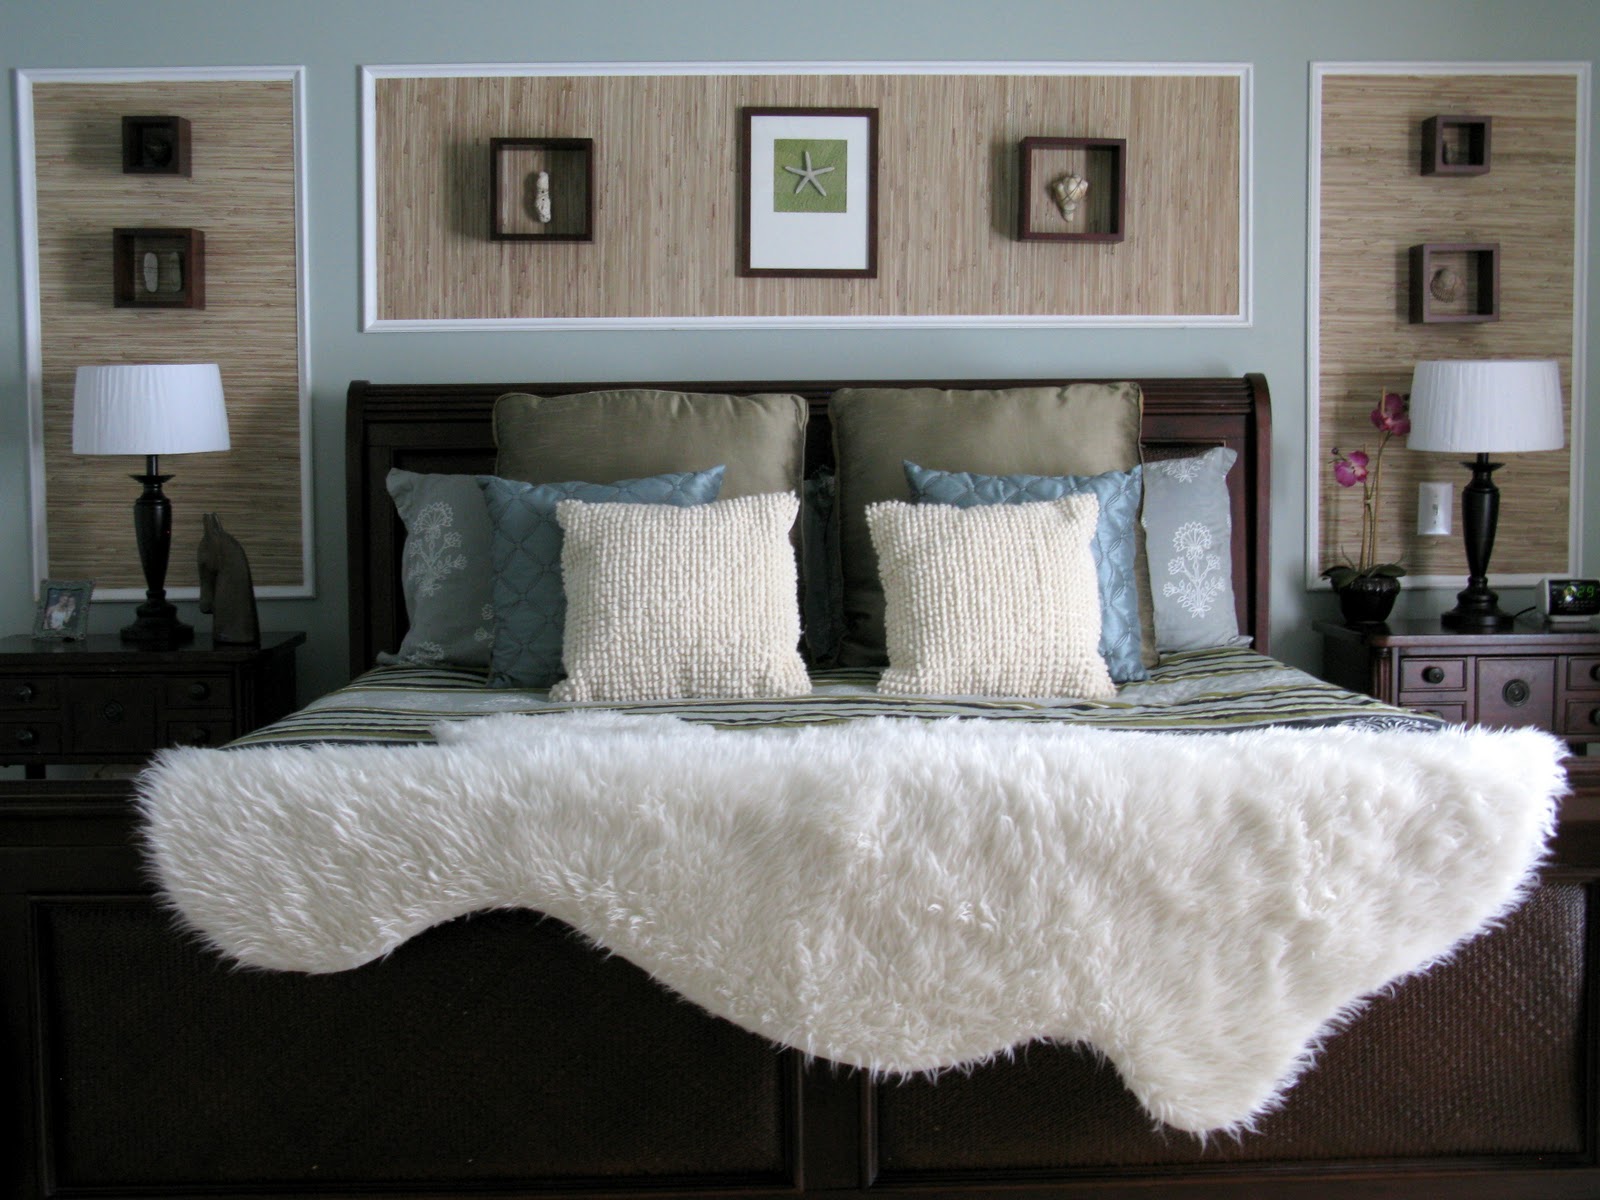 LoveYourRoom Voted One of the Top Bedrooms by Houzz  